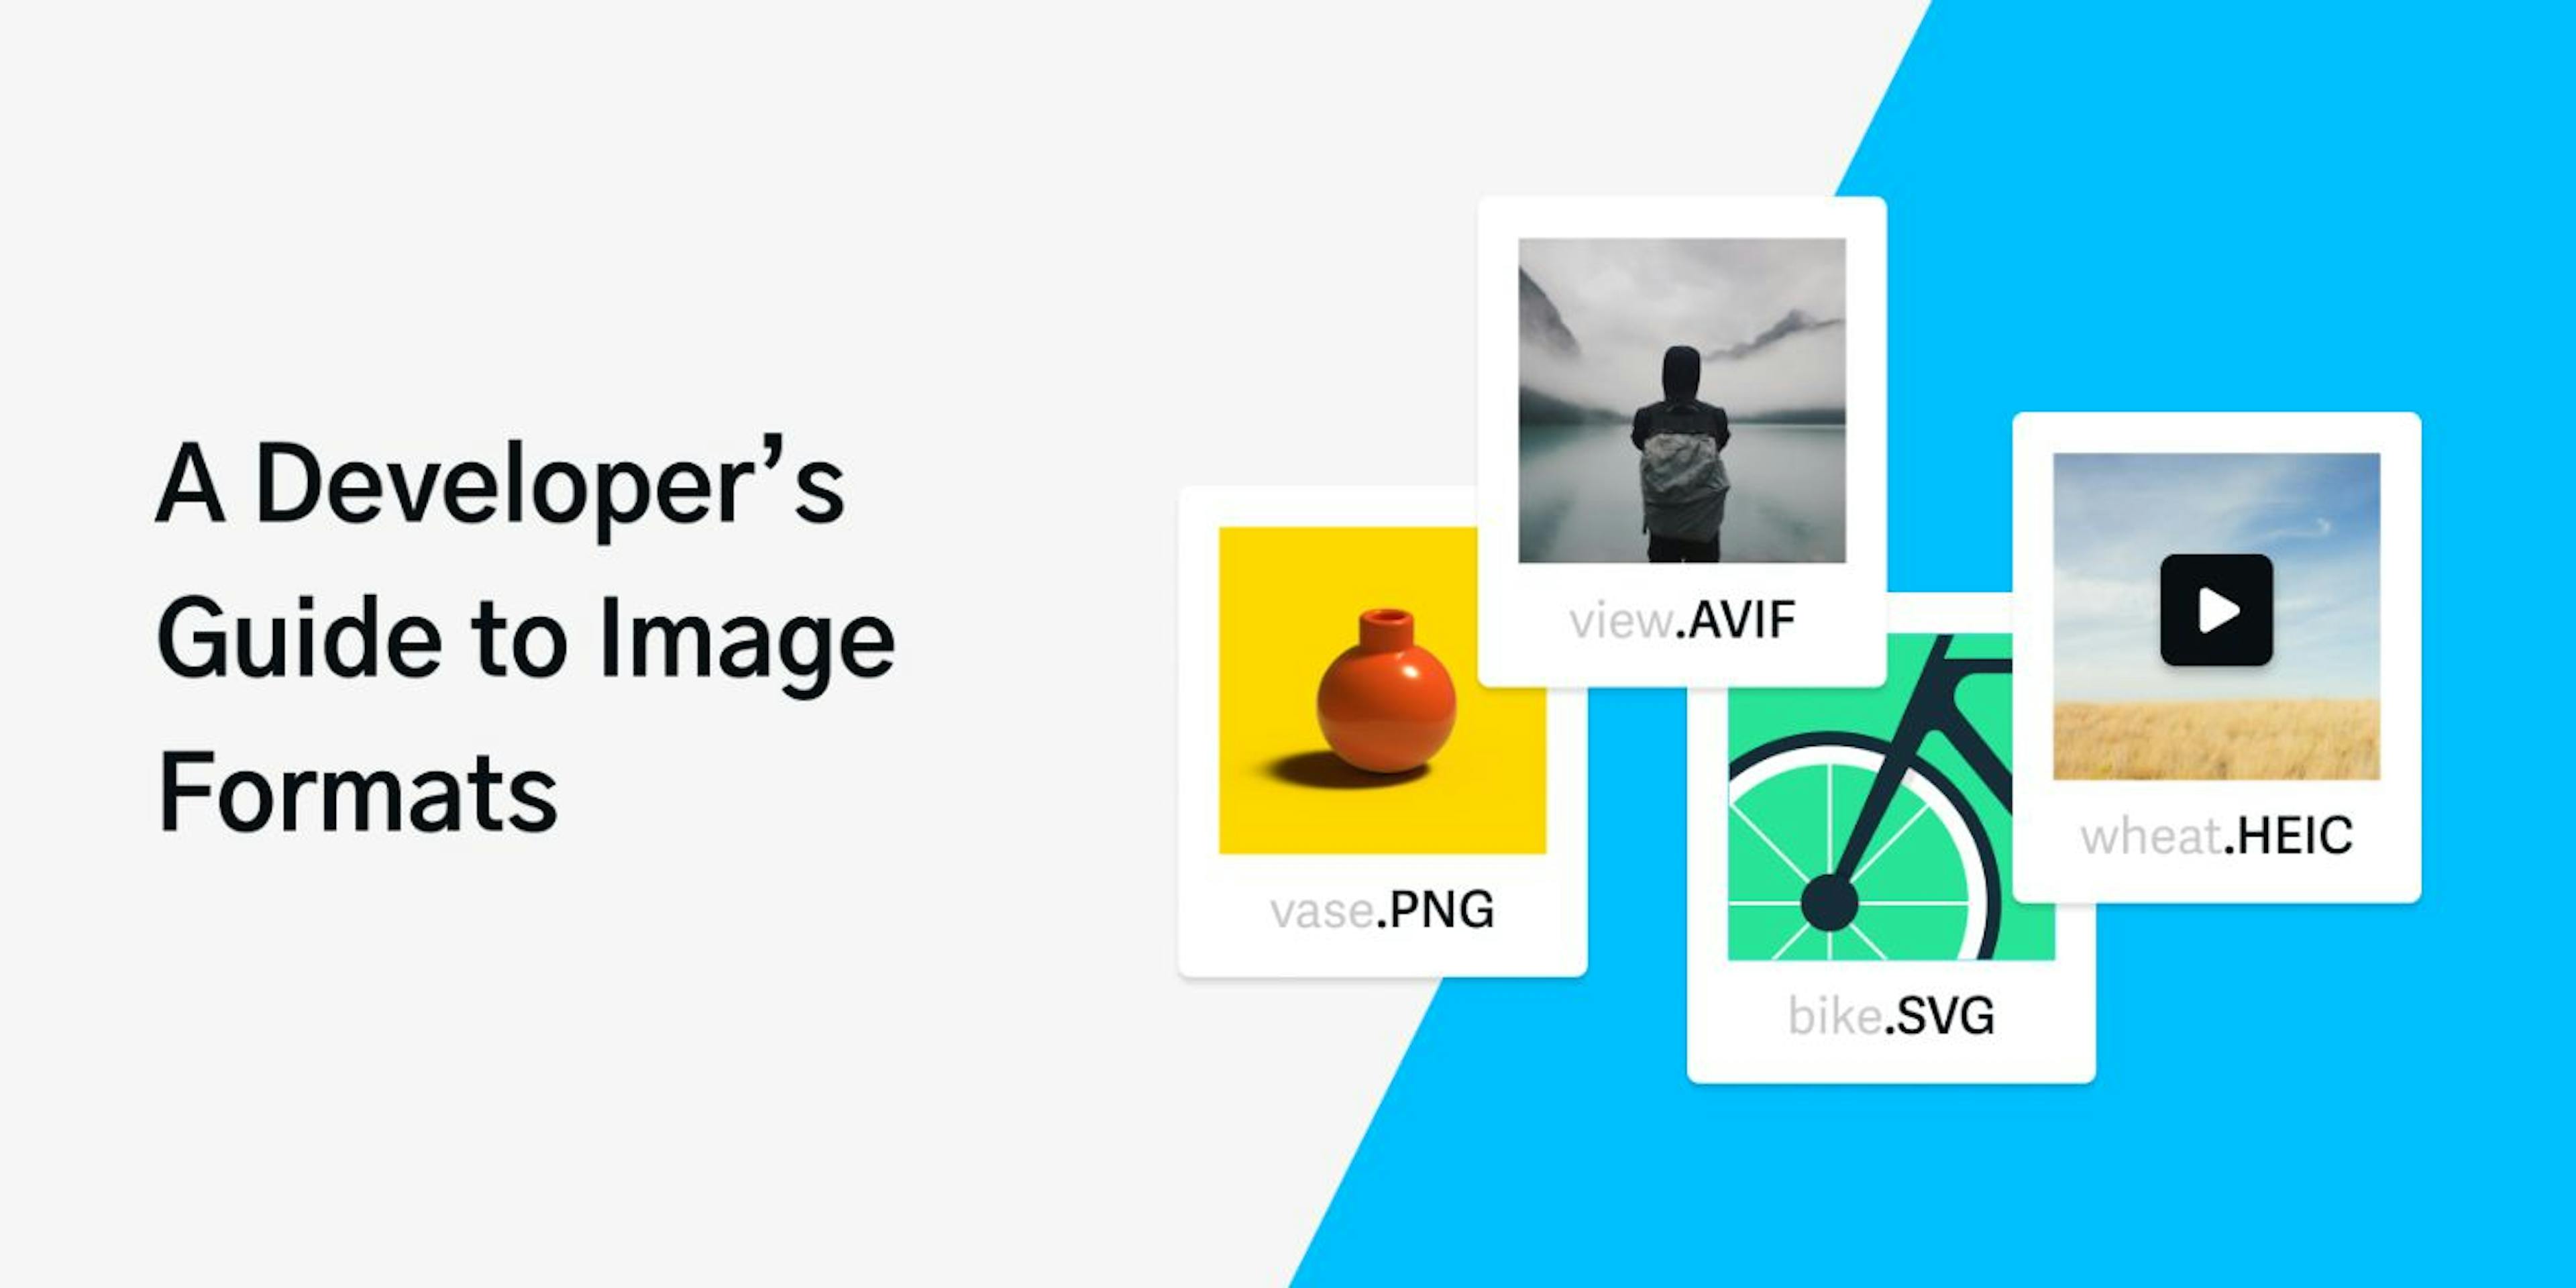 featured image - Understanding Image Types: A Developer's Guide